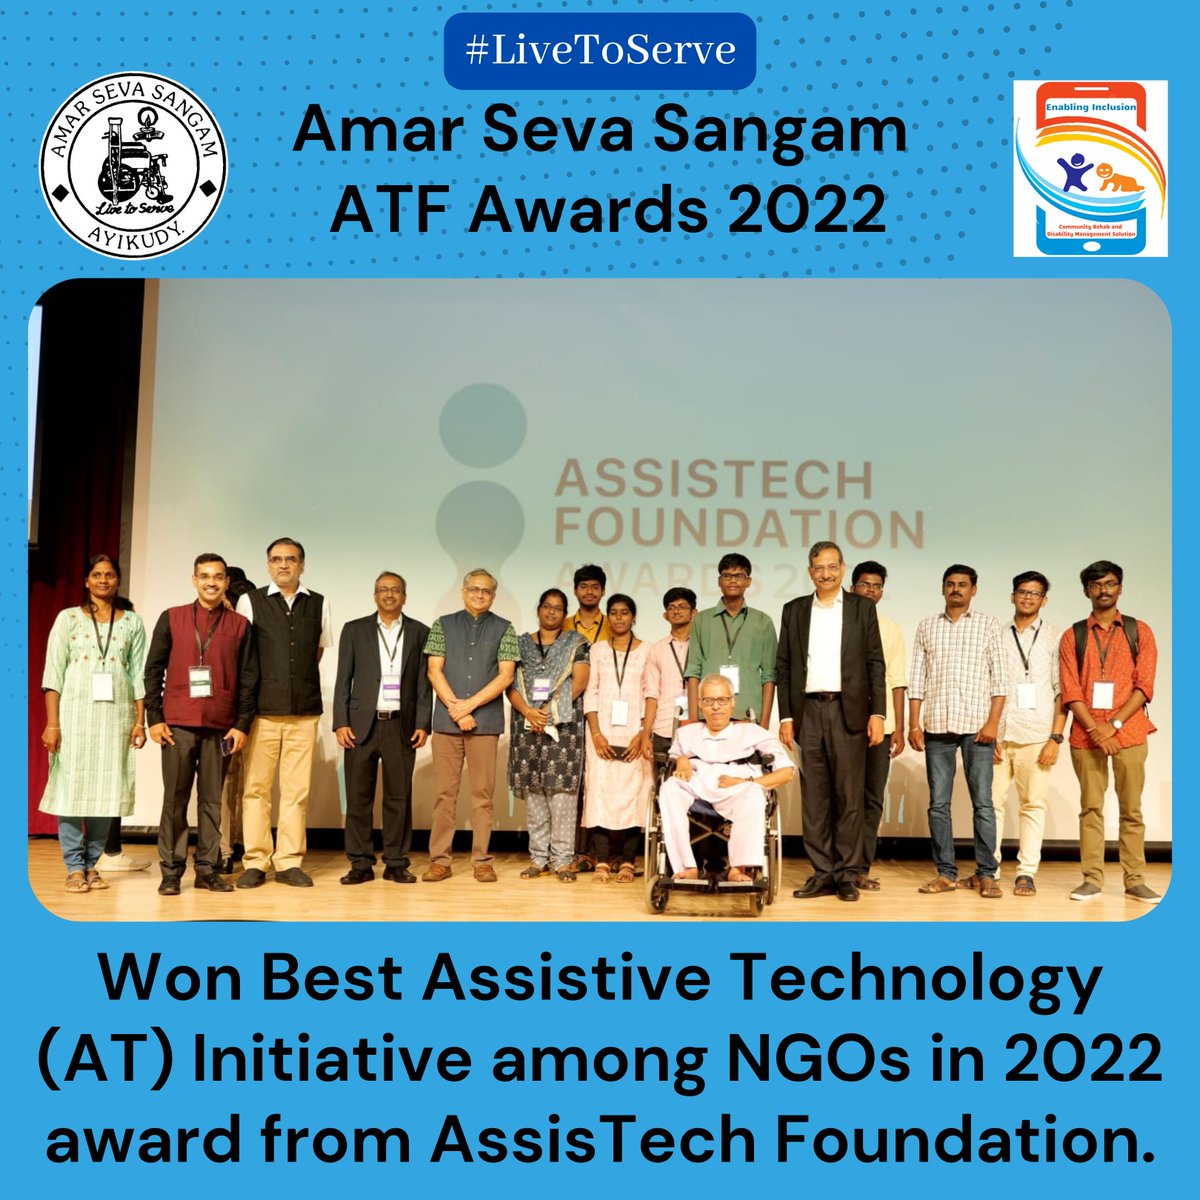 Congratulations to the Enabling Inclusion® Program’s - Pediatric Assistive Technology Access in Rural India.
.
.
.
.
#LivetoServe #AnInclusiveWorld #EnablingInclusion #pwd #disabilityrights #DifferentlyAbled #inclusion #specialneeds #accessibility #AmarSevaGlobalAssociation #ASSA